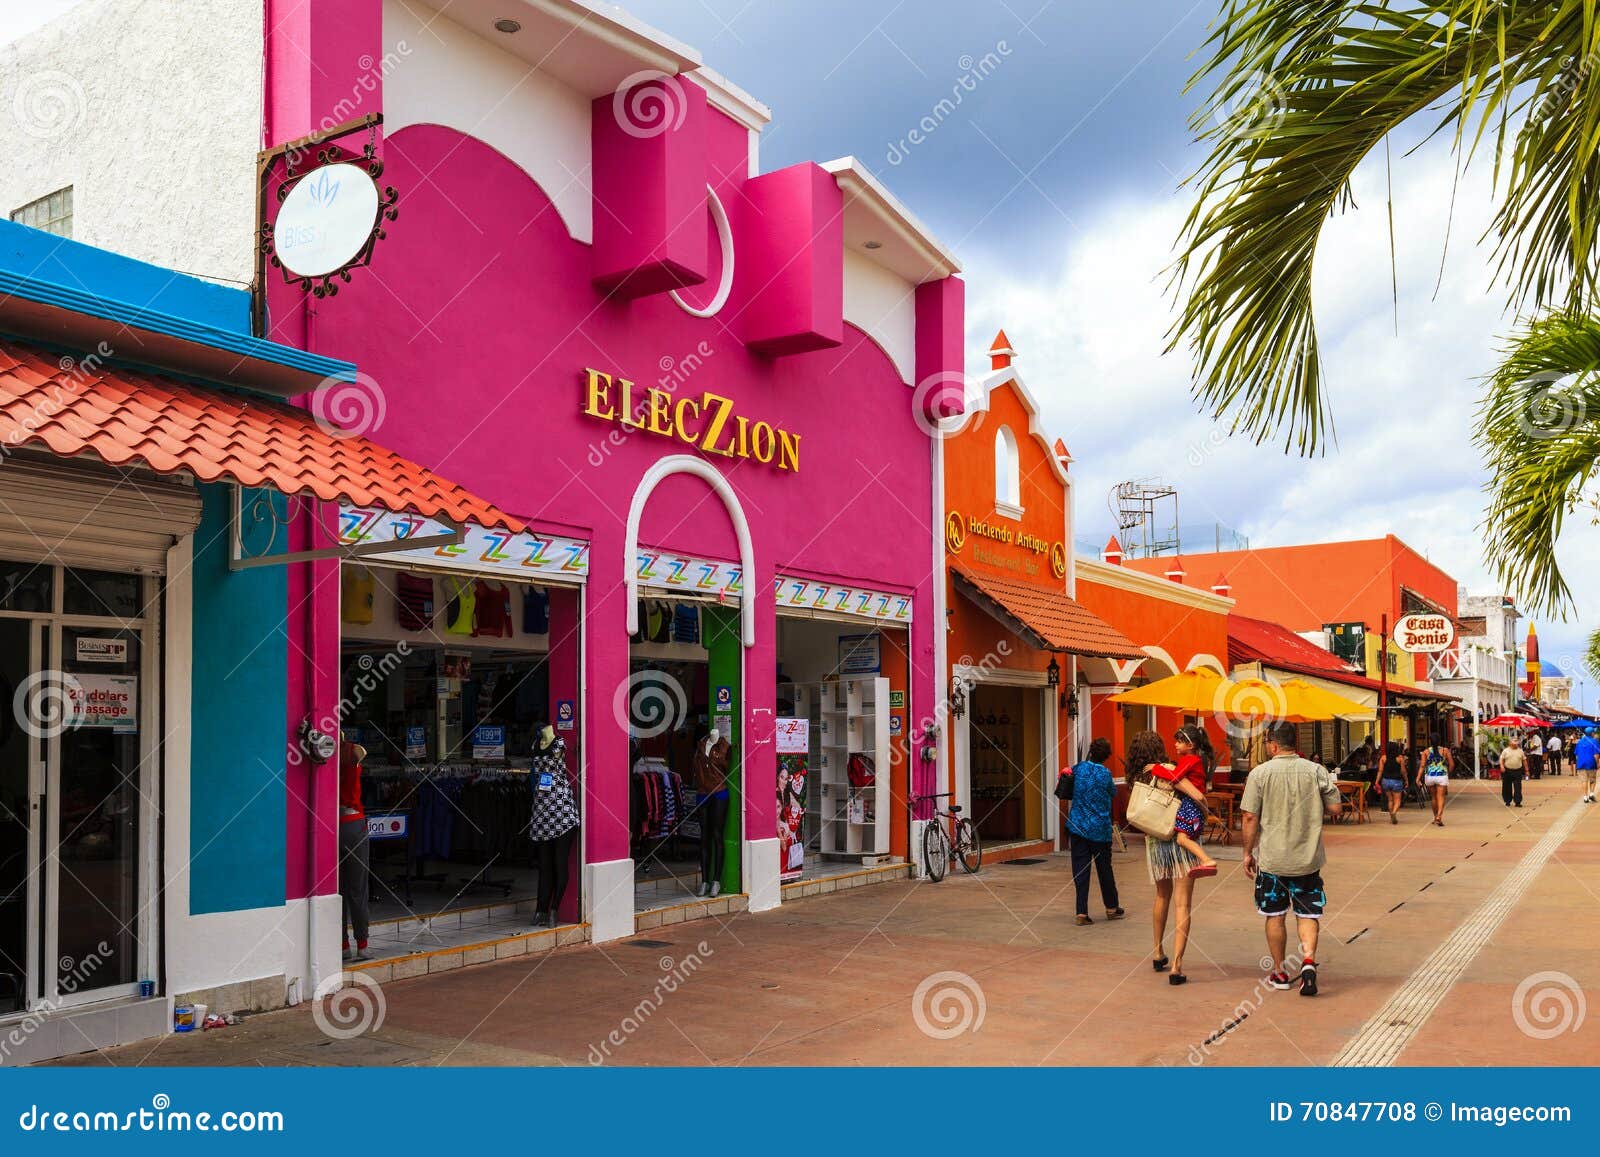 Where to Go Shopping in Cozumel